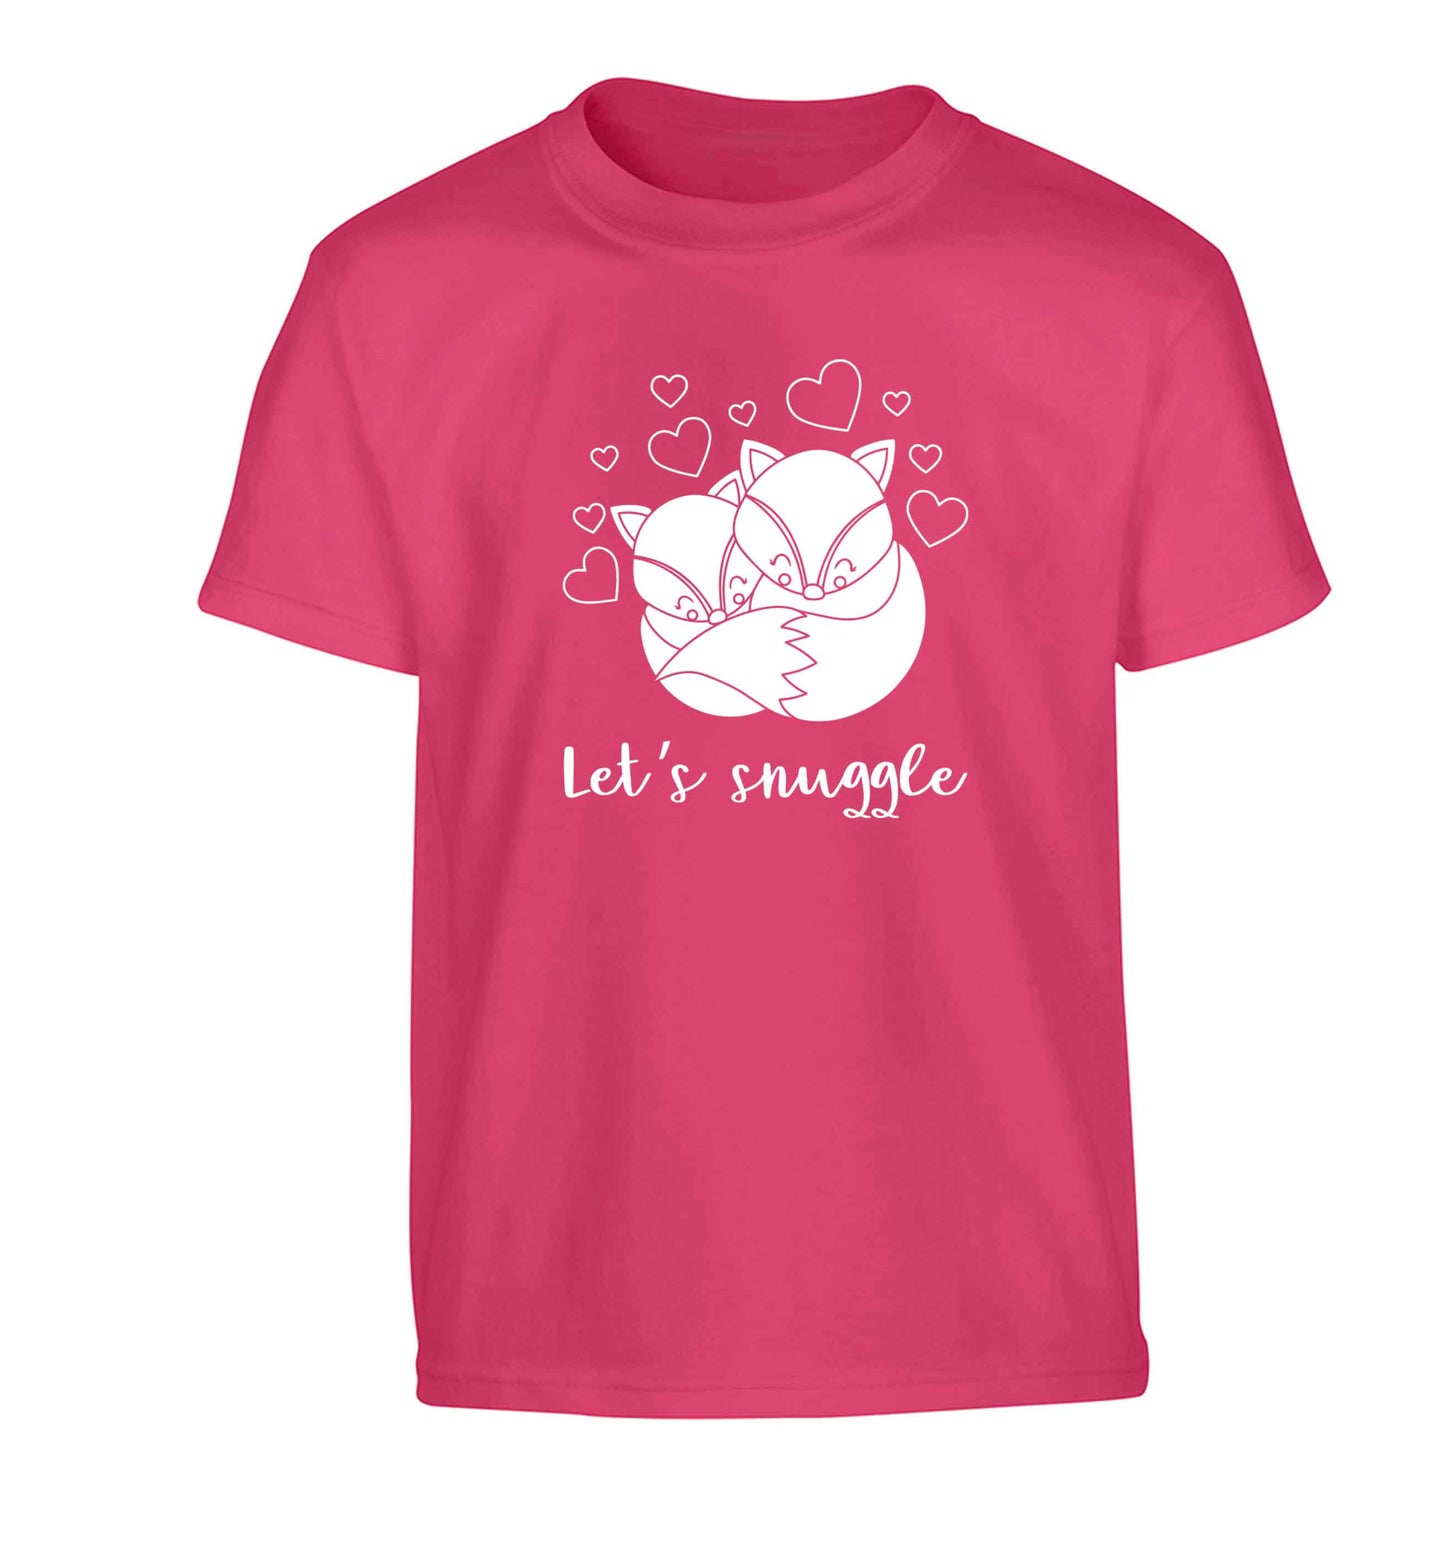 Let's snuggle Children's pink Tshirt 12-13 Years